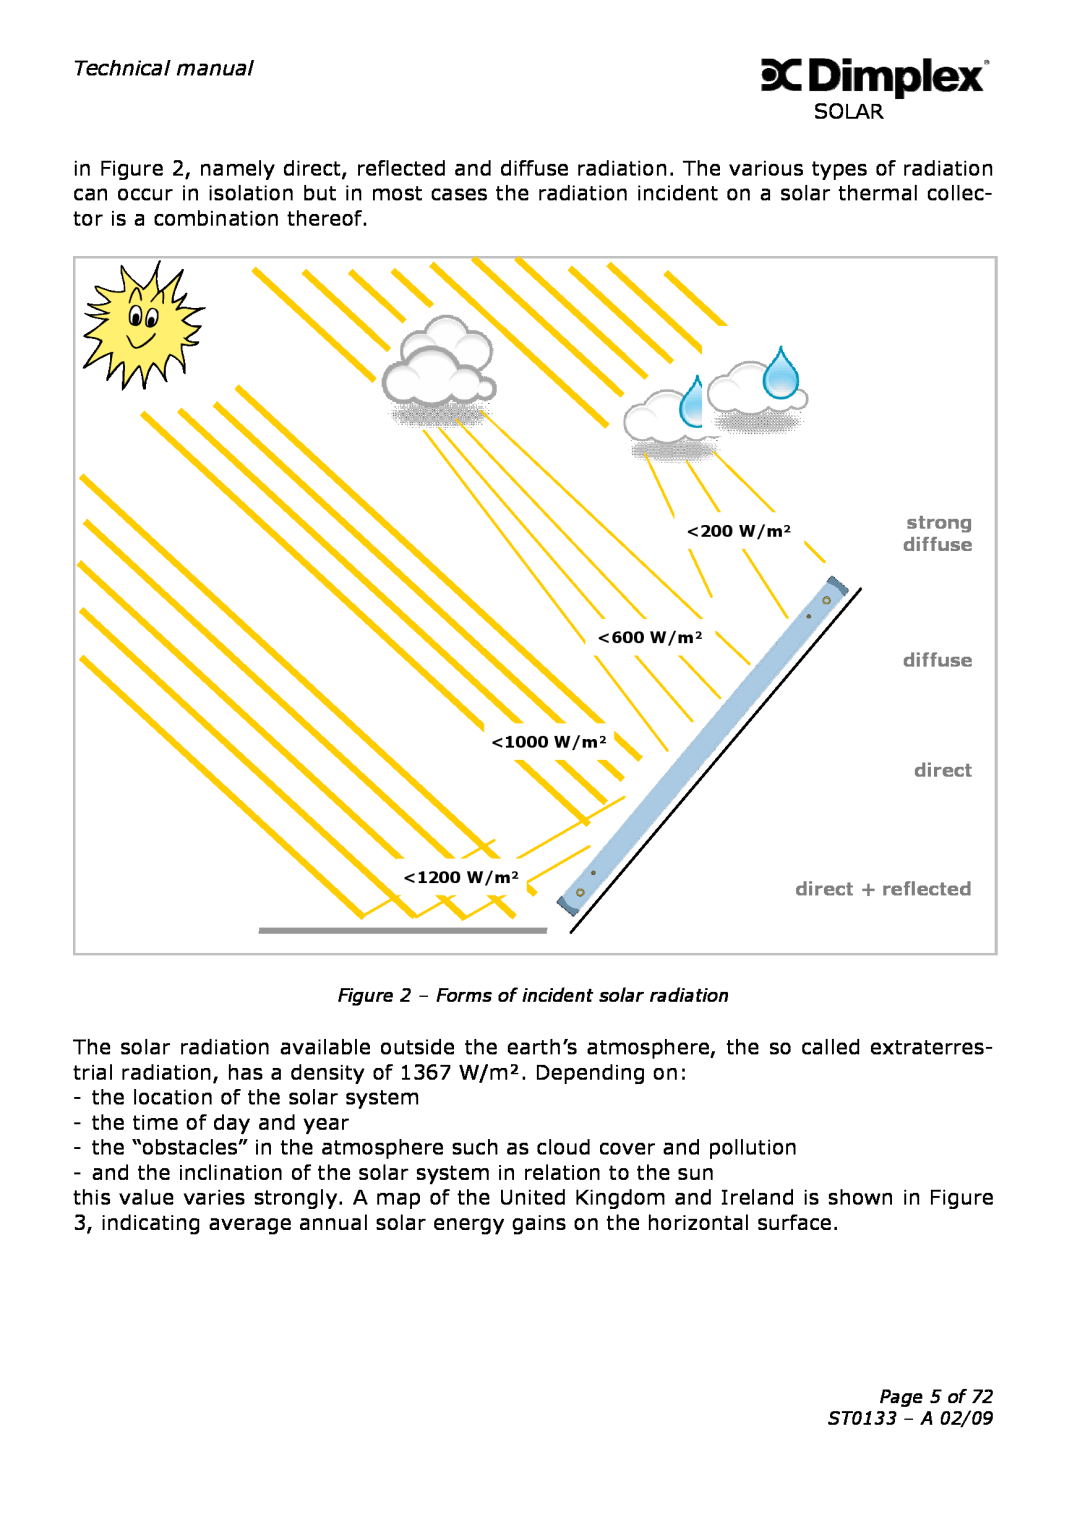 Dimplex Forms of incident solar radiation, Page 5 of ST0133 - A 02/09, 600 W/m², 1000 W/m², 1200 W/m² 